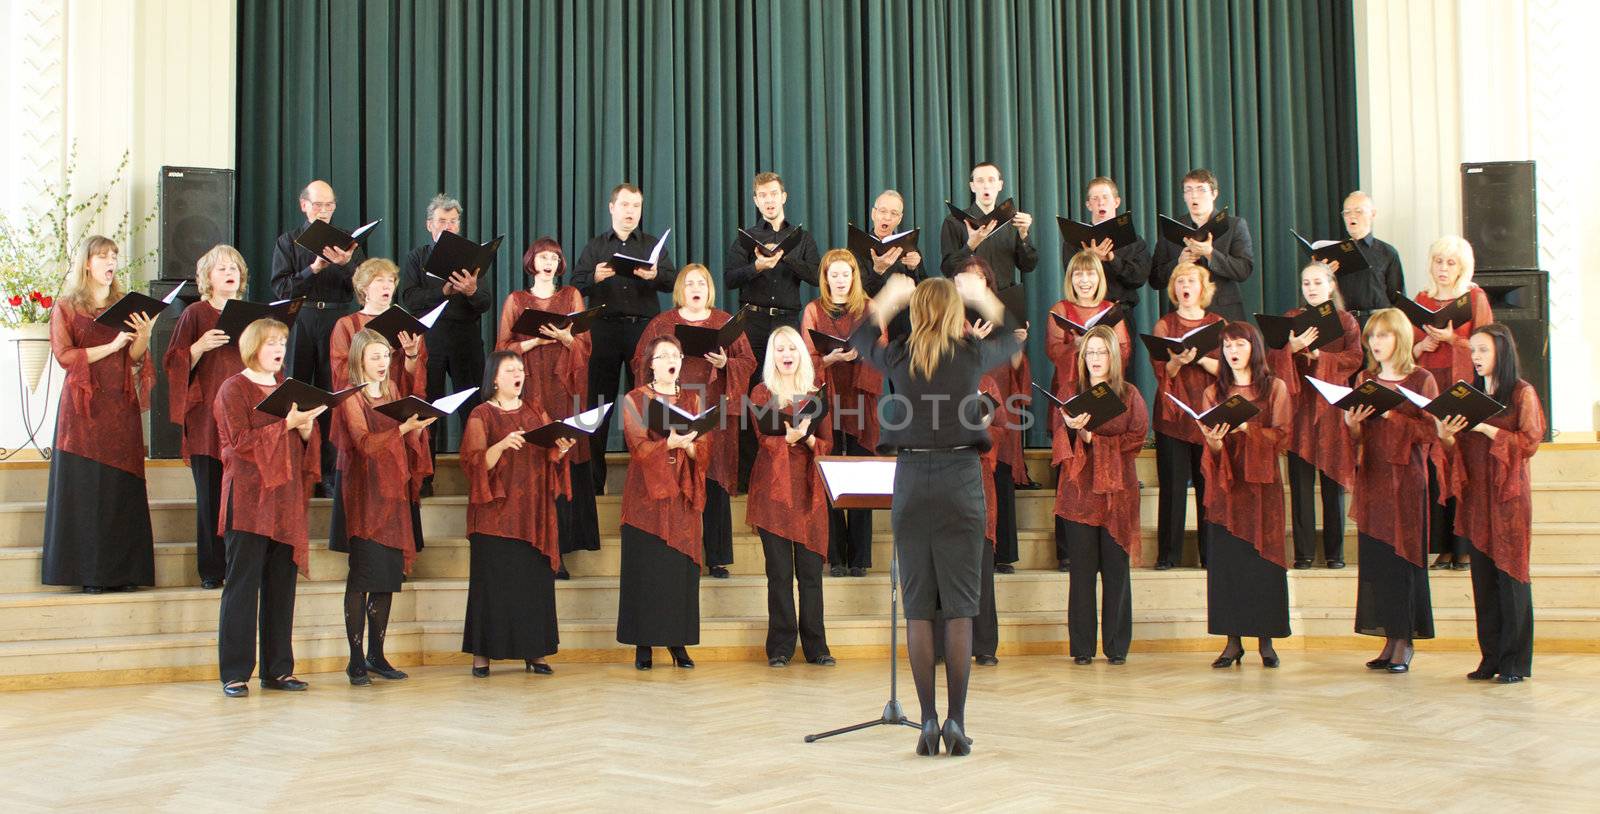 JELGAVA, LATVIA - MAY 08 : Choir ZEMGALE performs onstage at Local Choir Competition 2011 May 08, 2011 in Jelgava, LATVIA